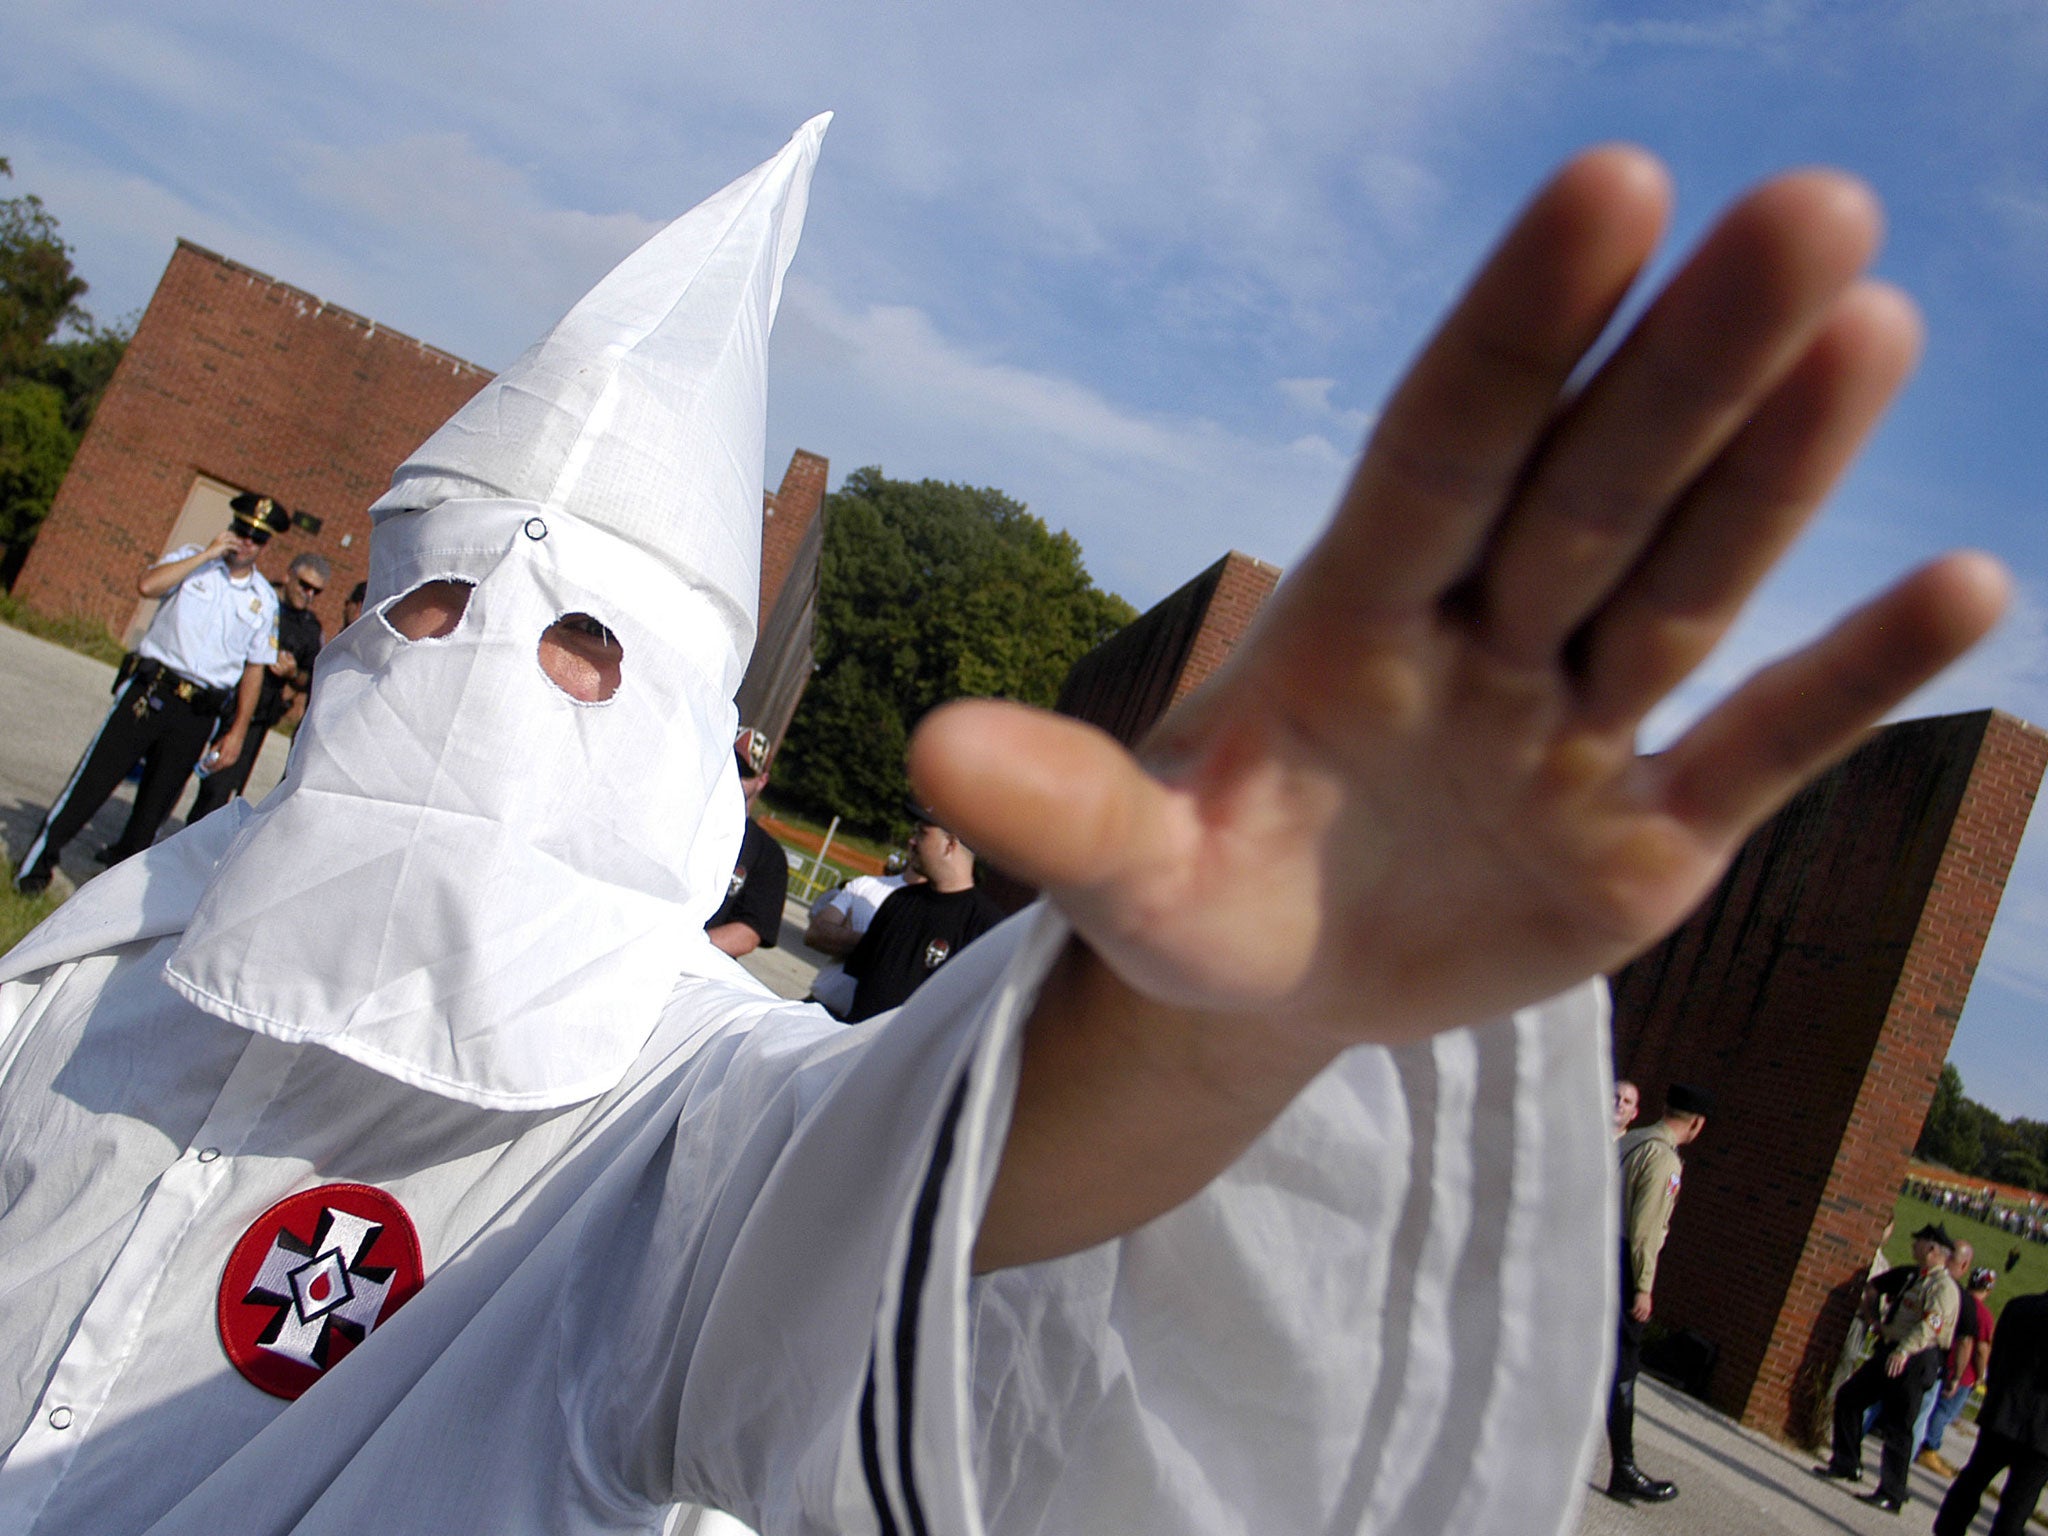 A member of the Ku Klux Klan salutes during American Nazi Party rally (file photo)